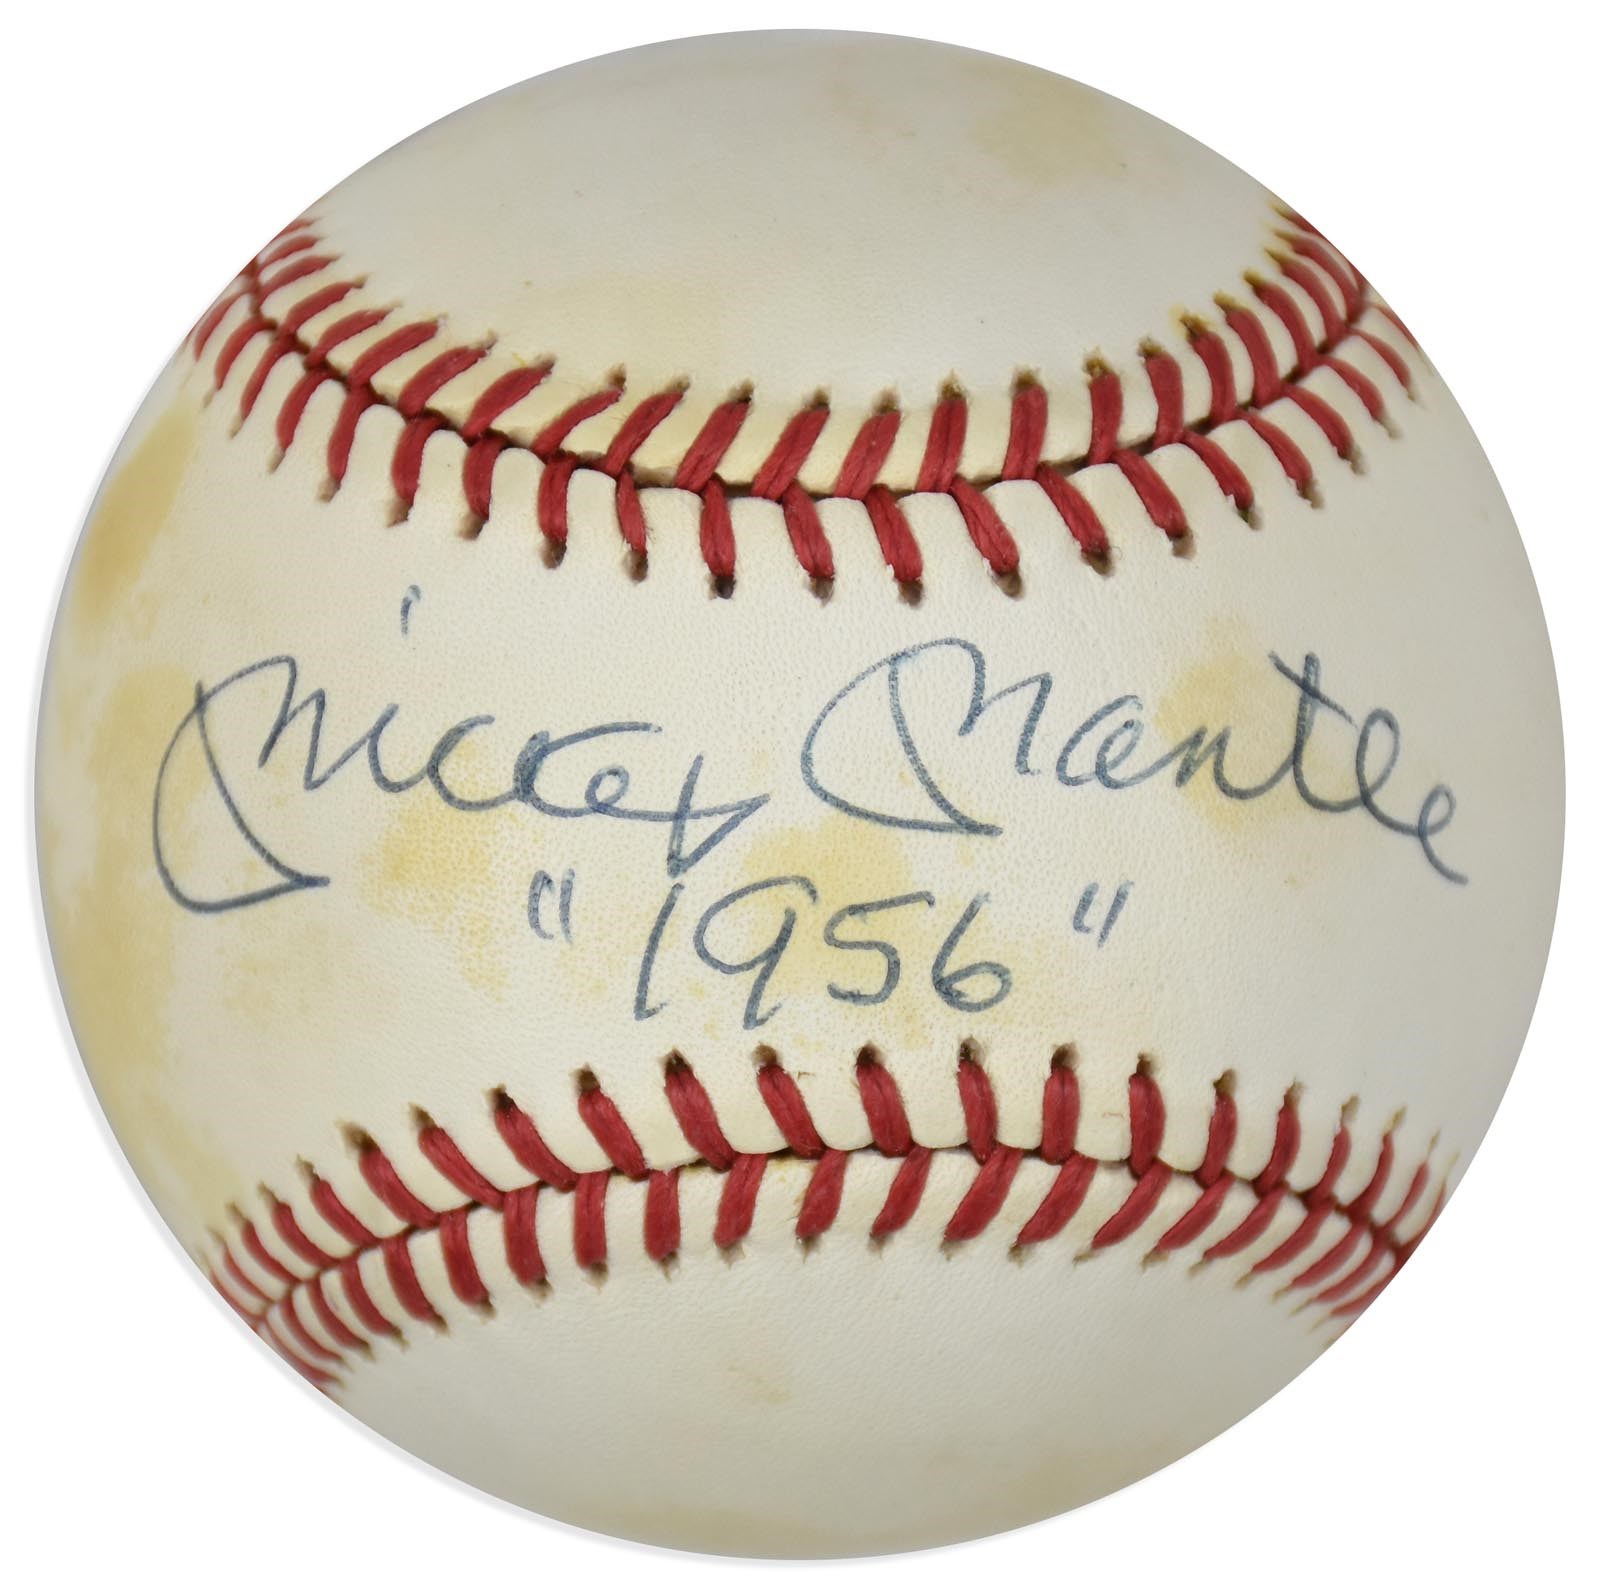 Mickey Mantle "1956" Signed & Inscribed Baseball from 1990's Promotion (PSA)